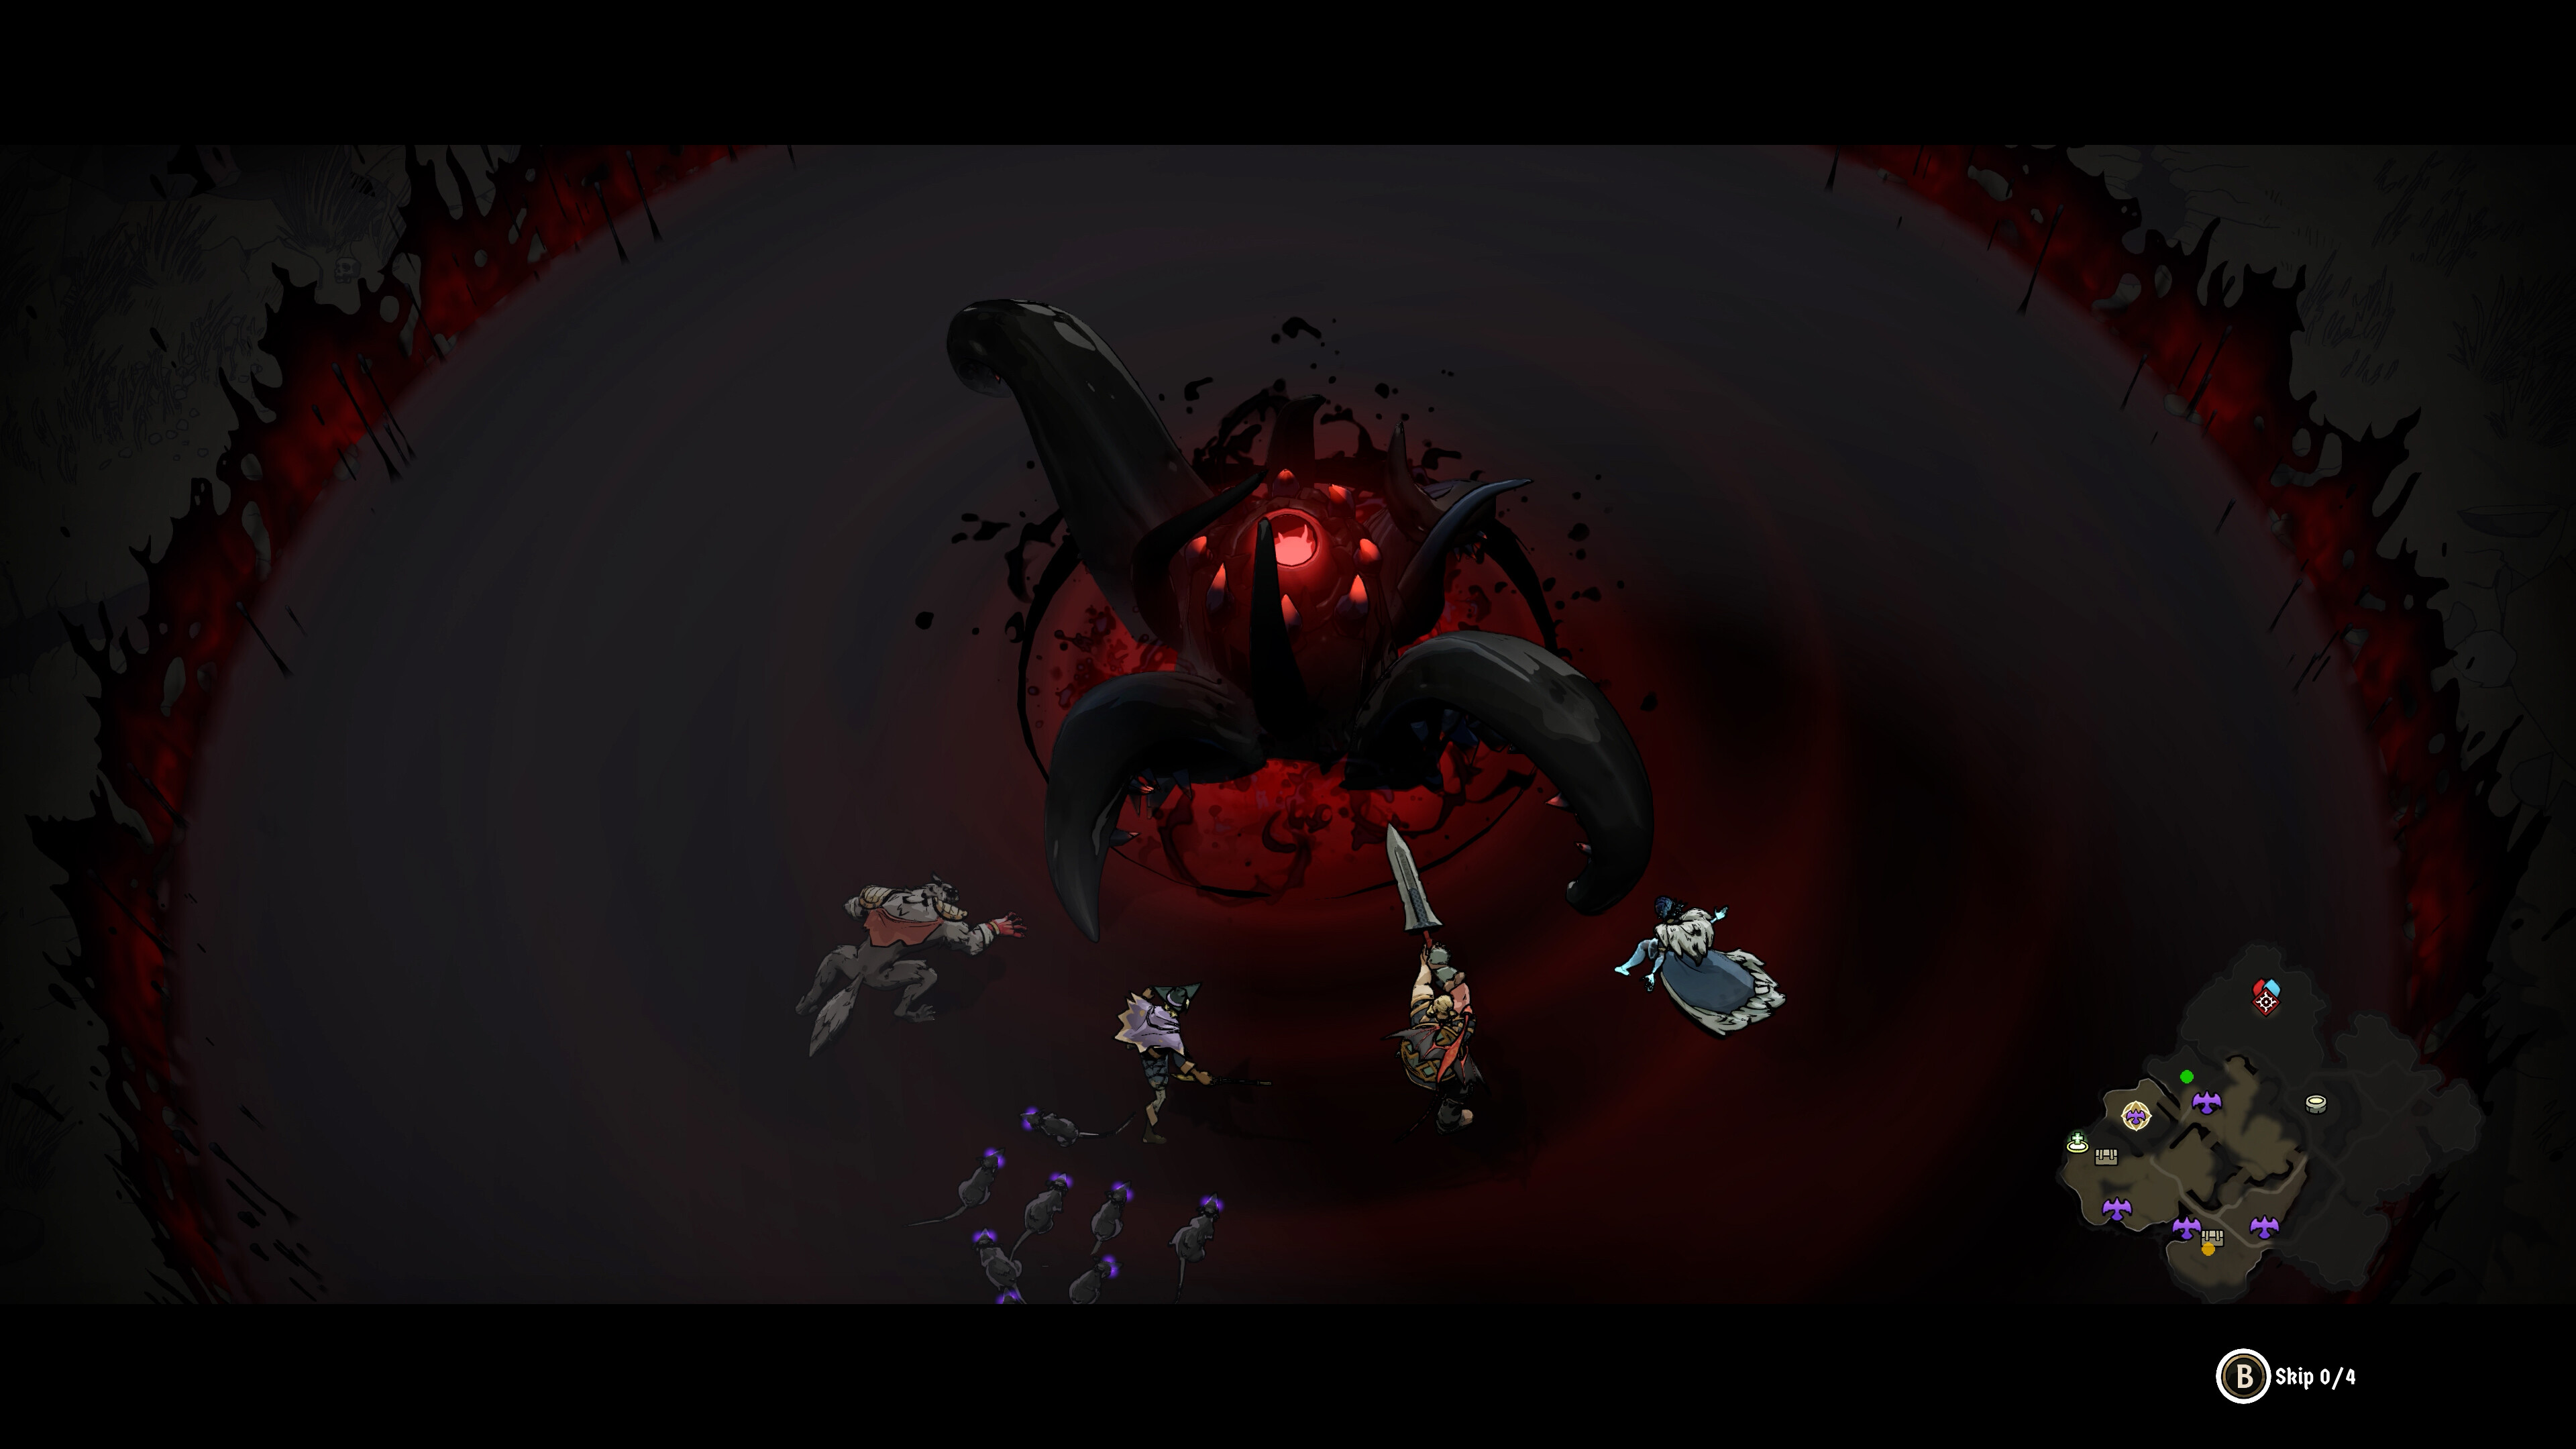 A boss fight against a huge tentacled monster in Ravenswatch.